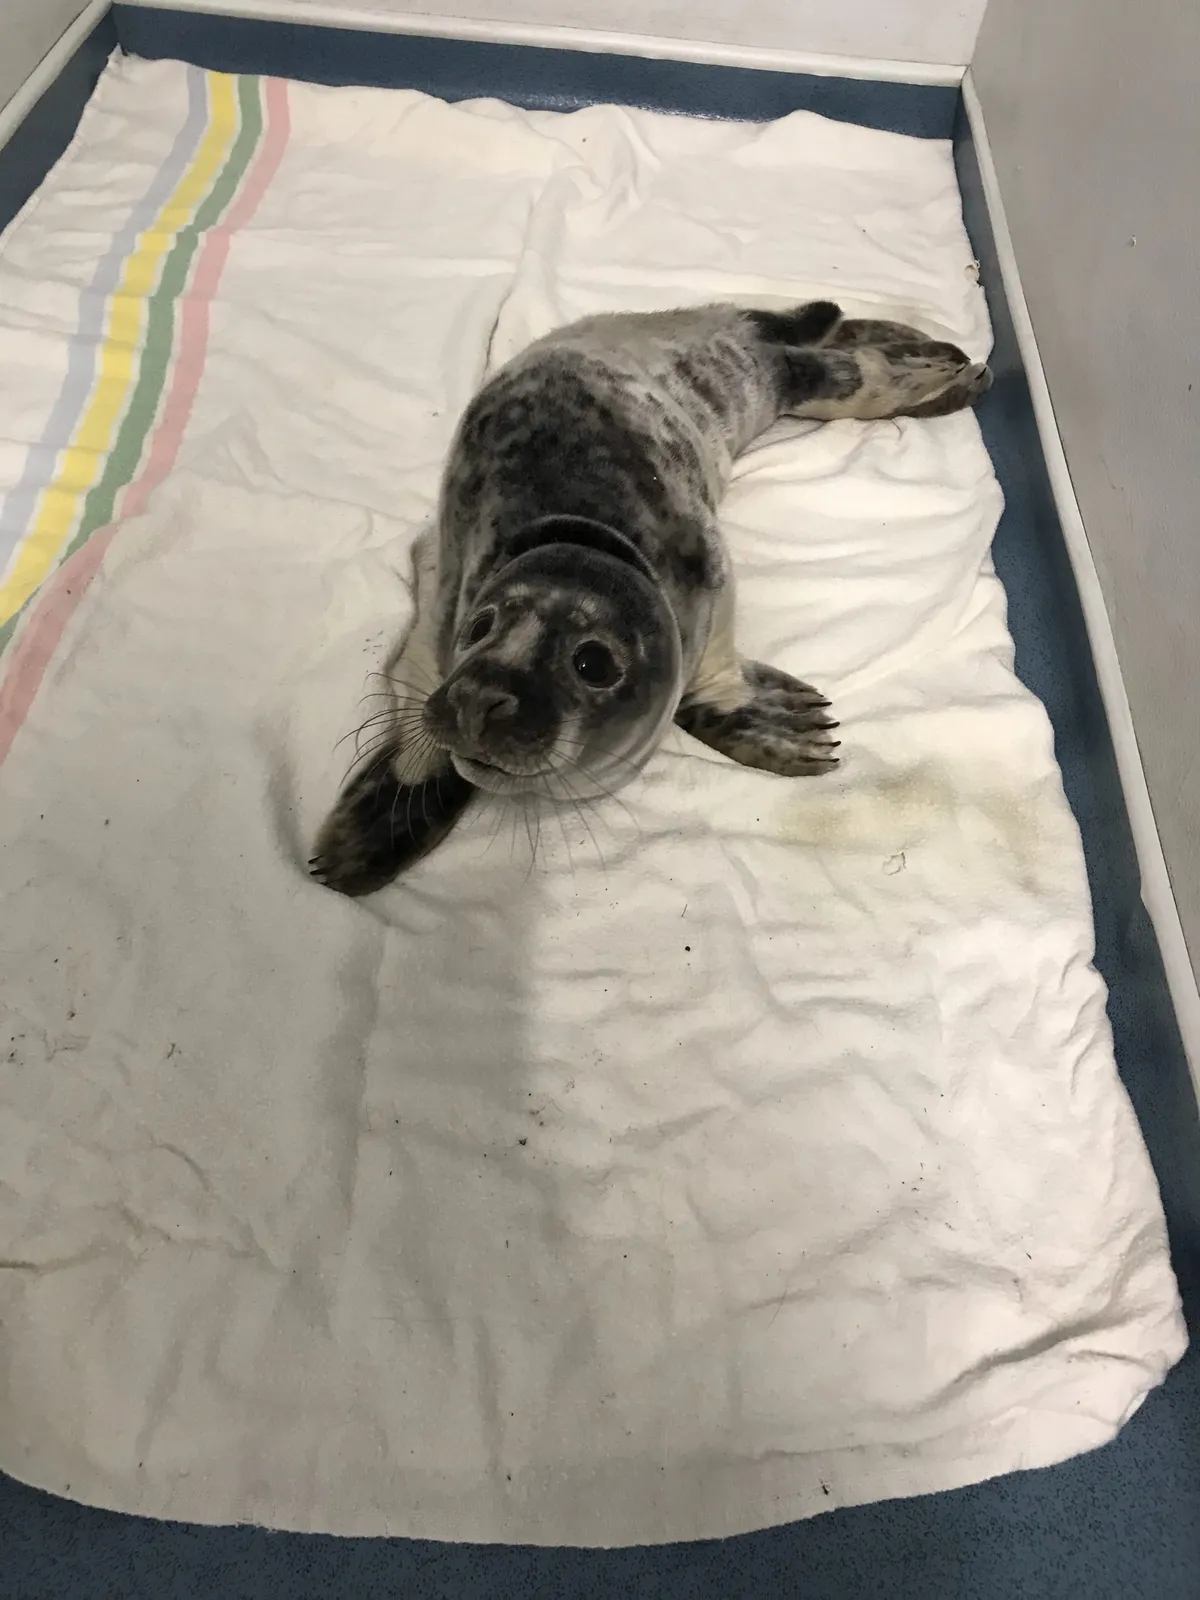 Zodiac the seal at vets. © RSPCA